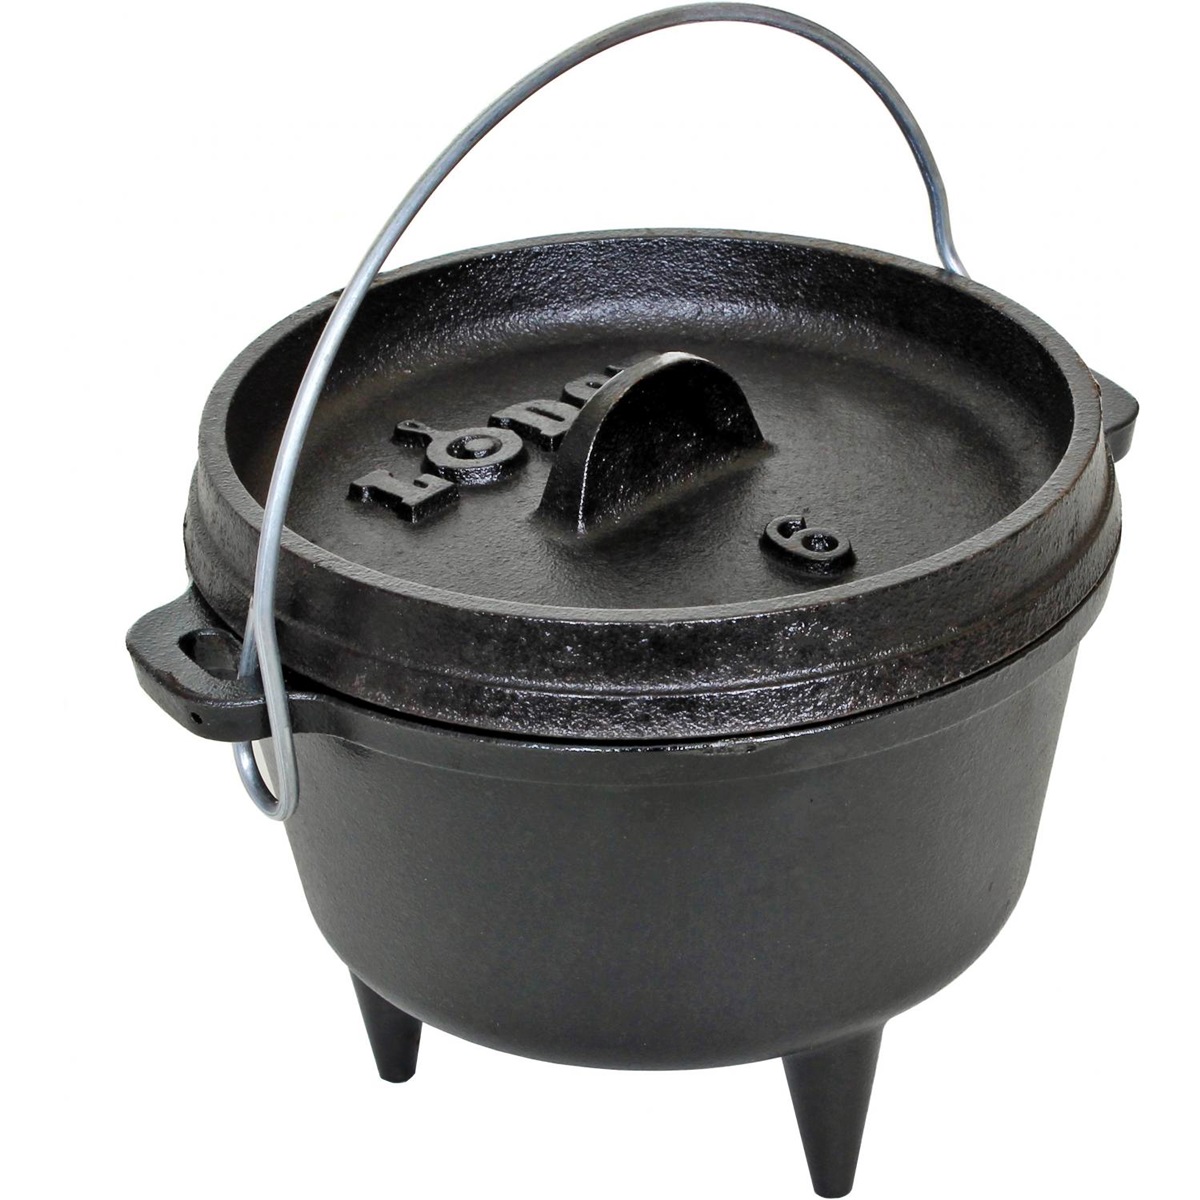 NATIVO 6QT Pre-Seasoned Outdoor Cast Iron Dutch Oven Pot with Multipurpose  Lid, Dutch Oven for Camping and Outdoor Cooking using Fire and Coals, With